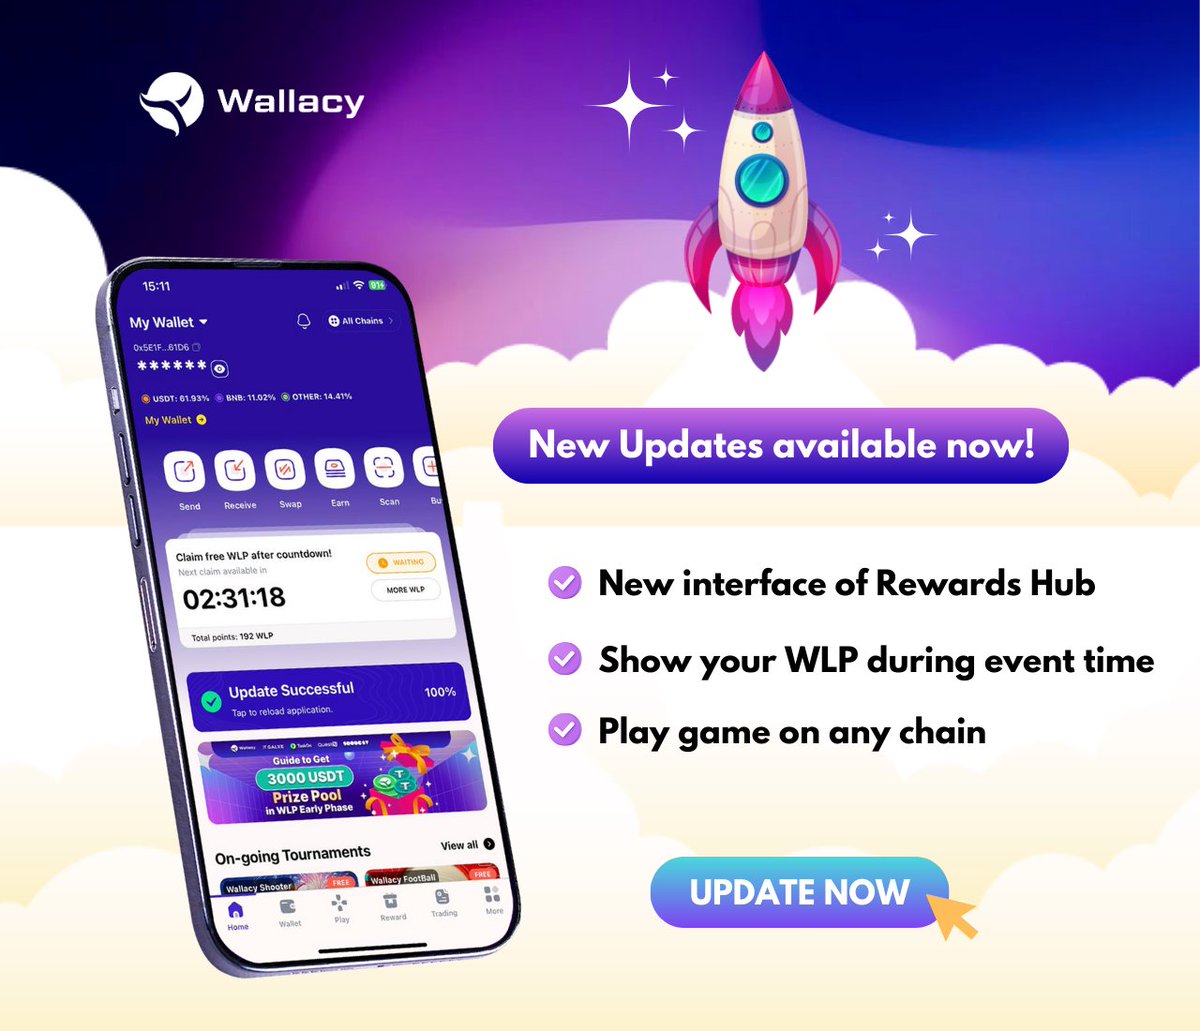 📣 Go to Wallacy and Update the app now! 📣

We've made some exciting updates to enhance your experience:

✅ Update New interface for #RewardsHub
✅ Show your #WLP earned during event time (Feb 22 - Mar 13), you can check in Rewards Hub
✅ Play game on any supported #chains